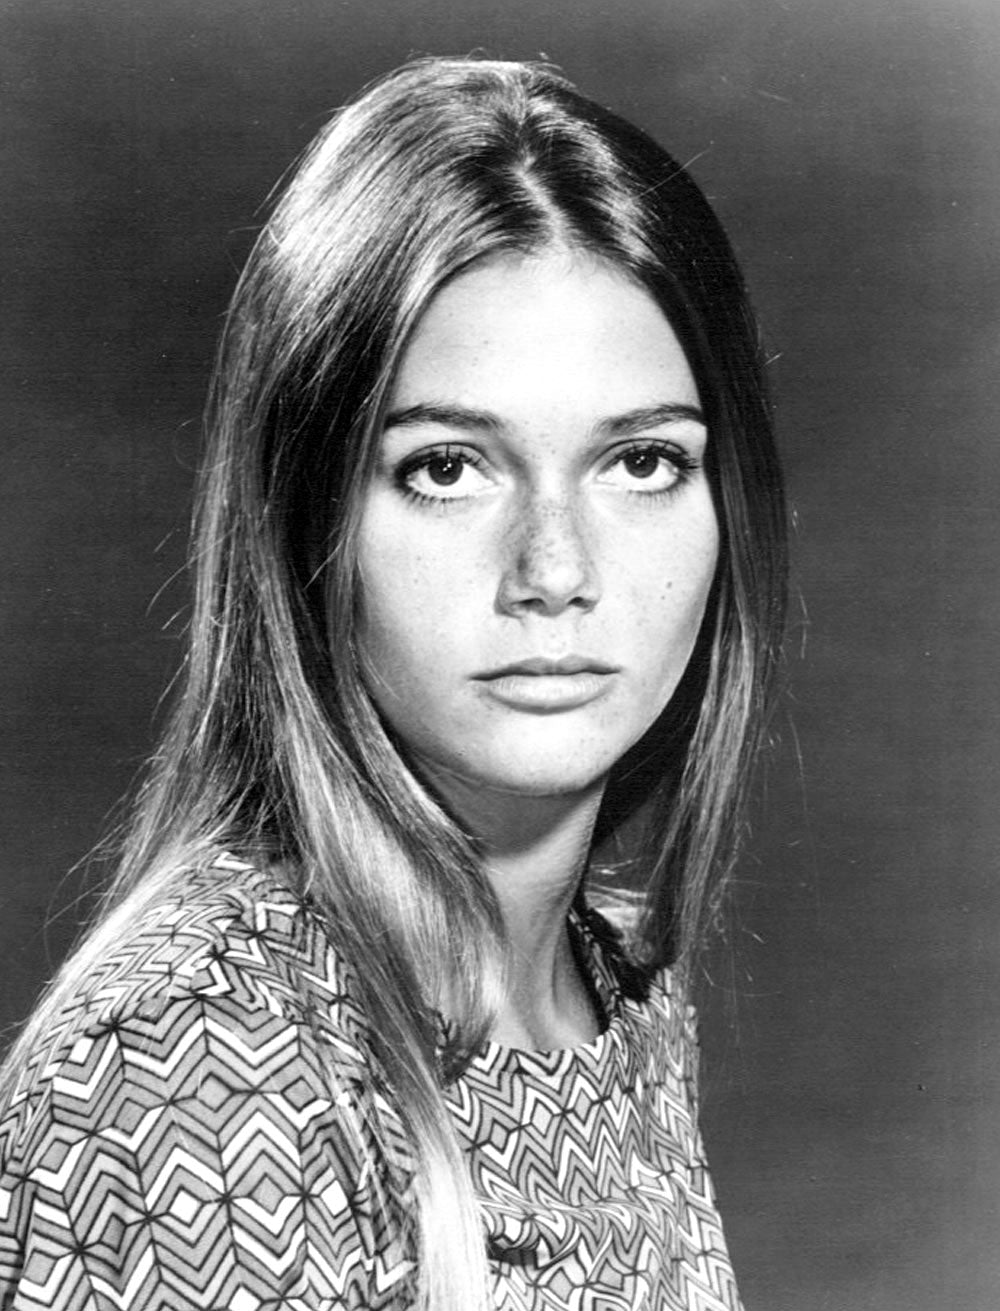 Late goodbye to Peggy Lipton – The Vampire's Wife